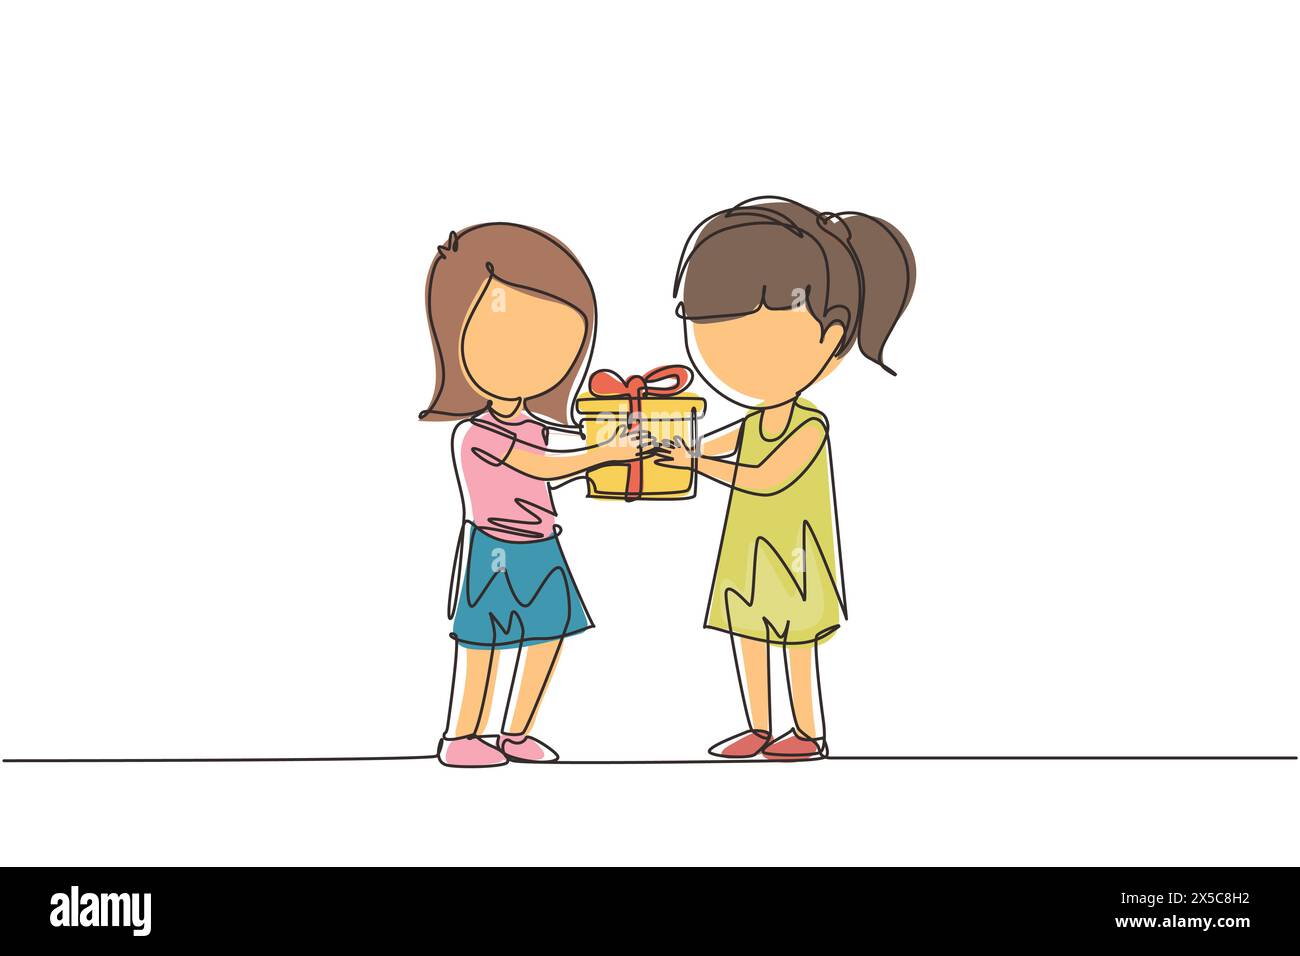 Single one line drawing girl giving her friend birthday ribbon bow gift box. Children excited receiving gift from friend. Child hand over holiday pres Stock Vector